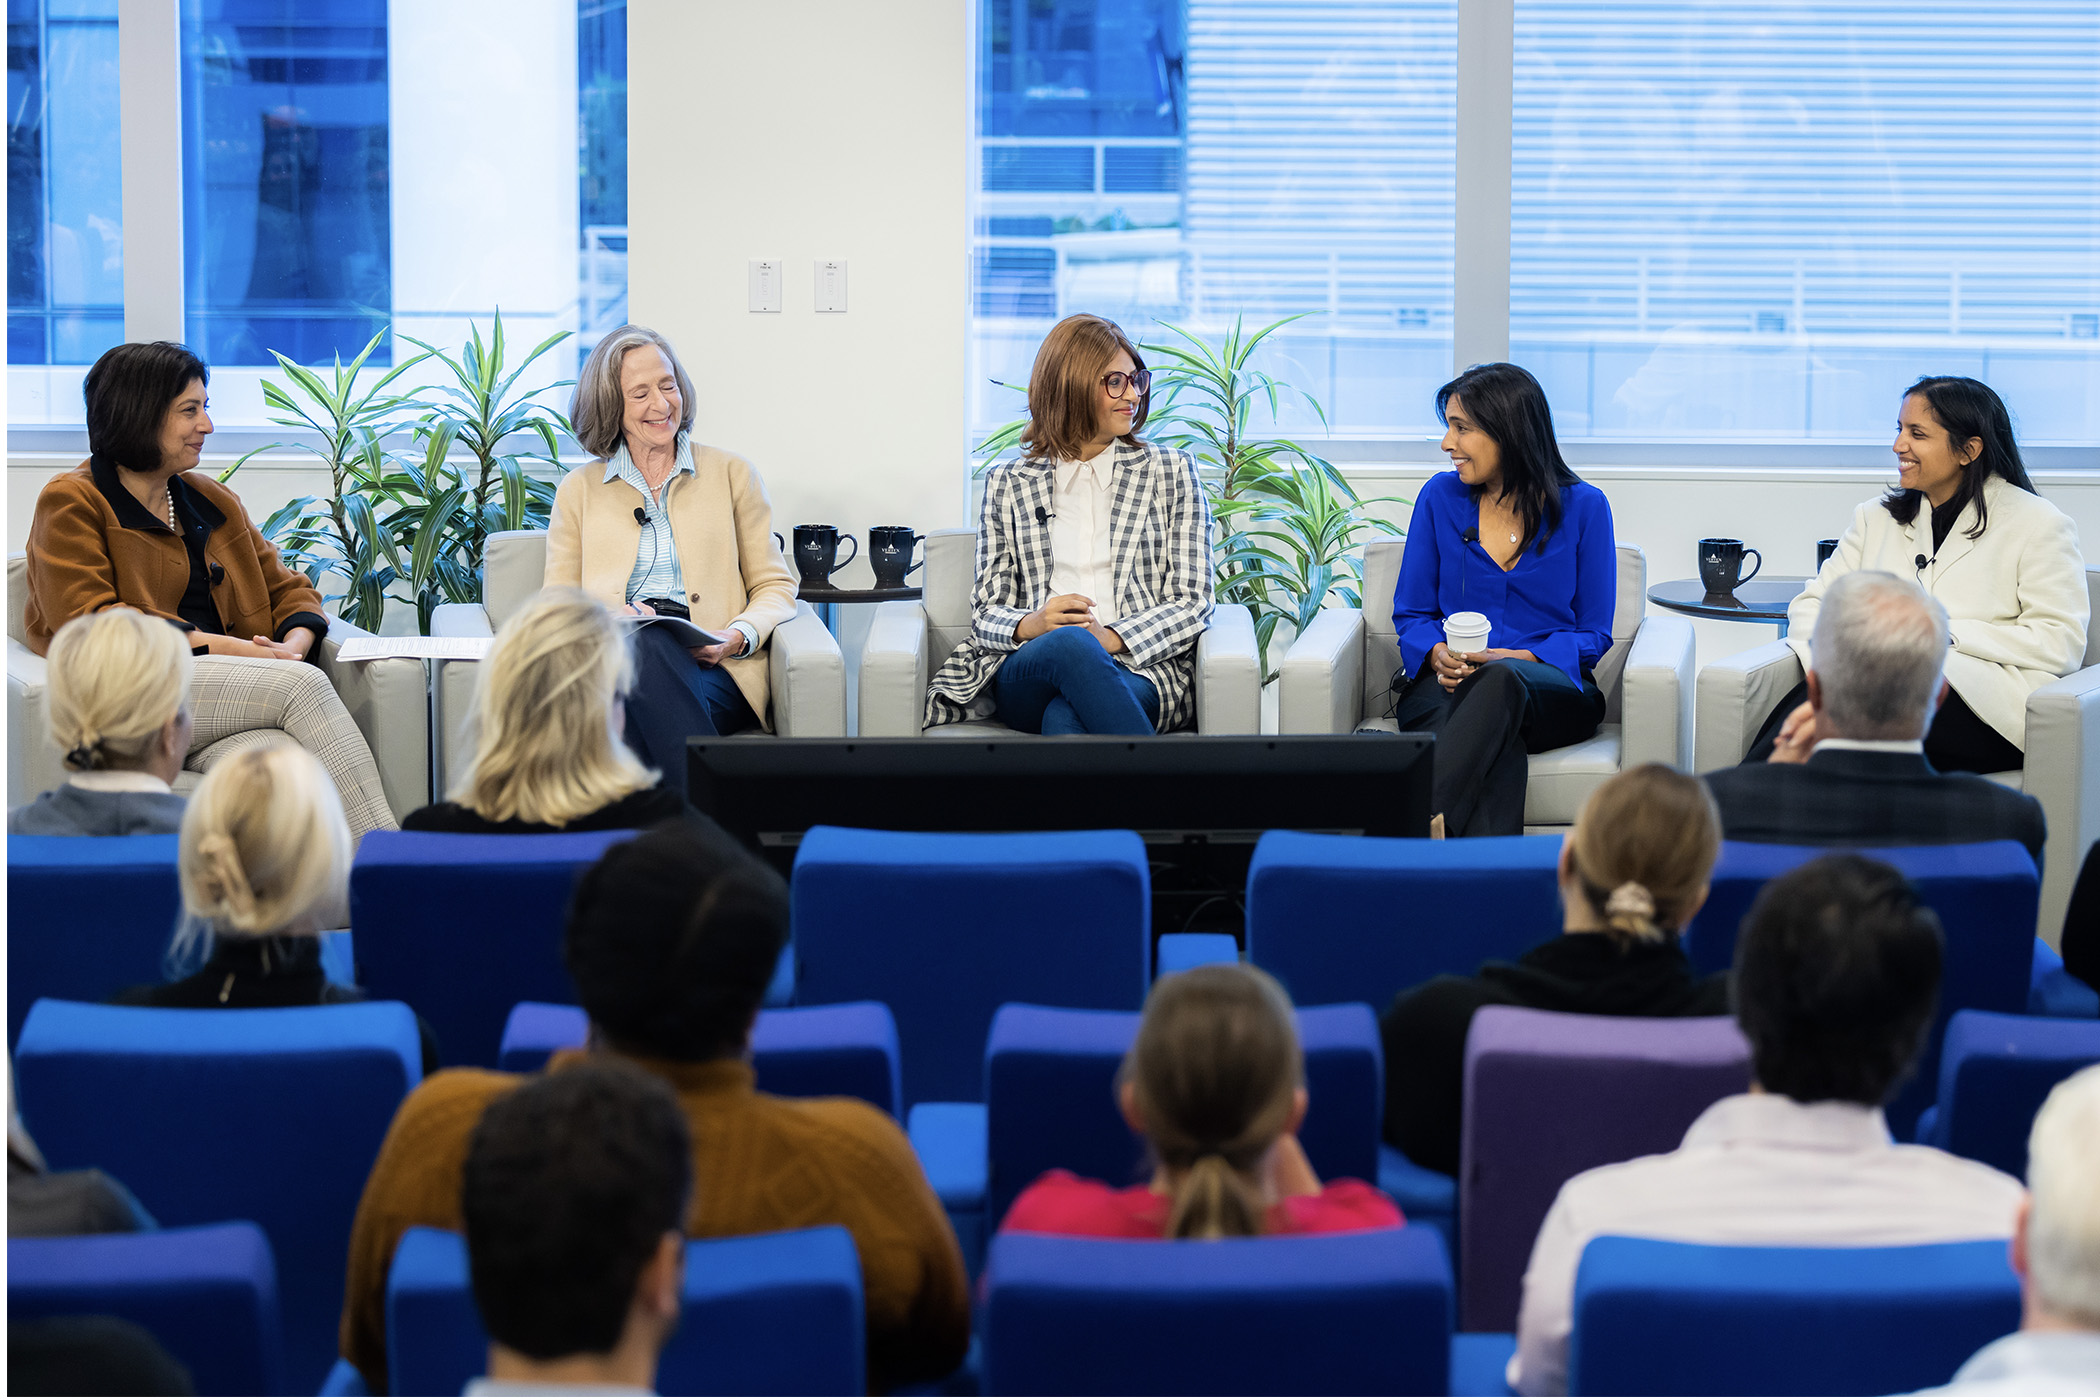 An image of a panel of women, including Reshma Kewalramani, speaking during an ID&E week event